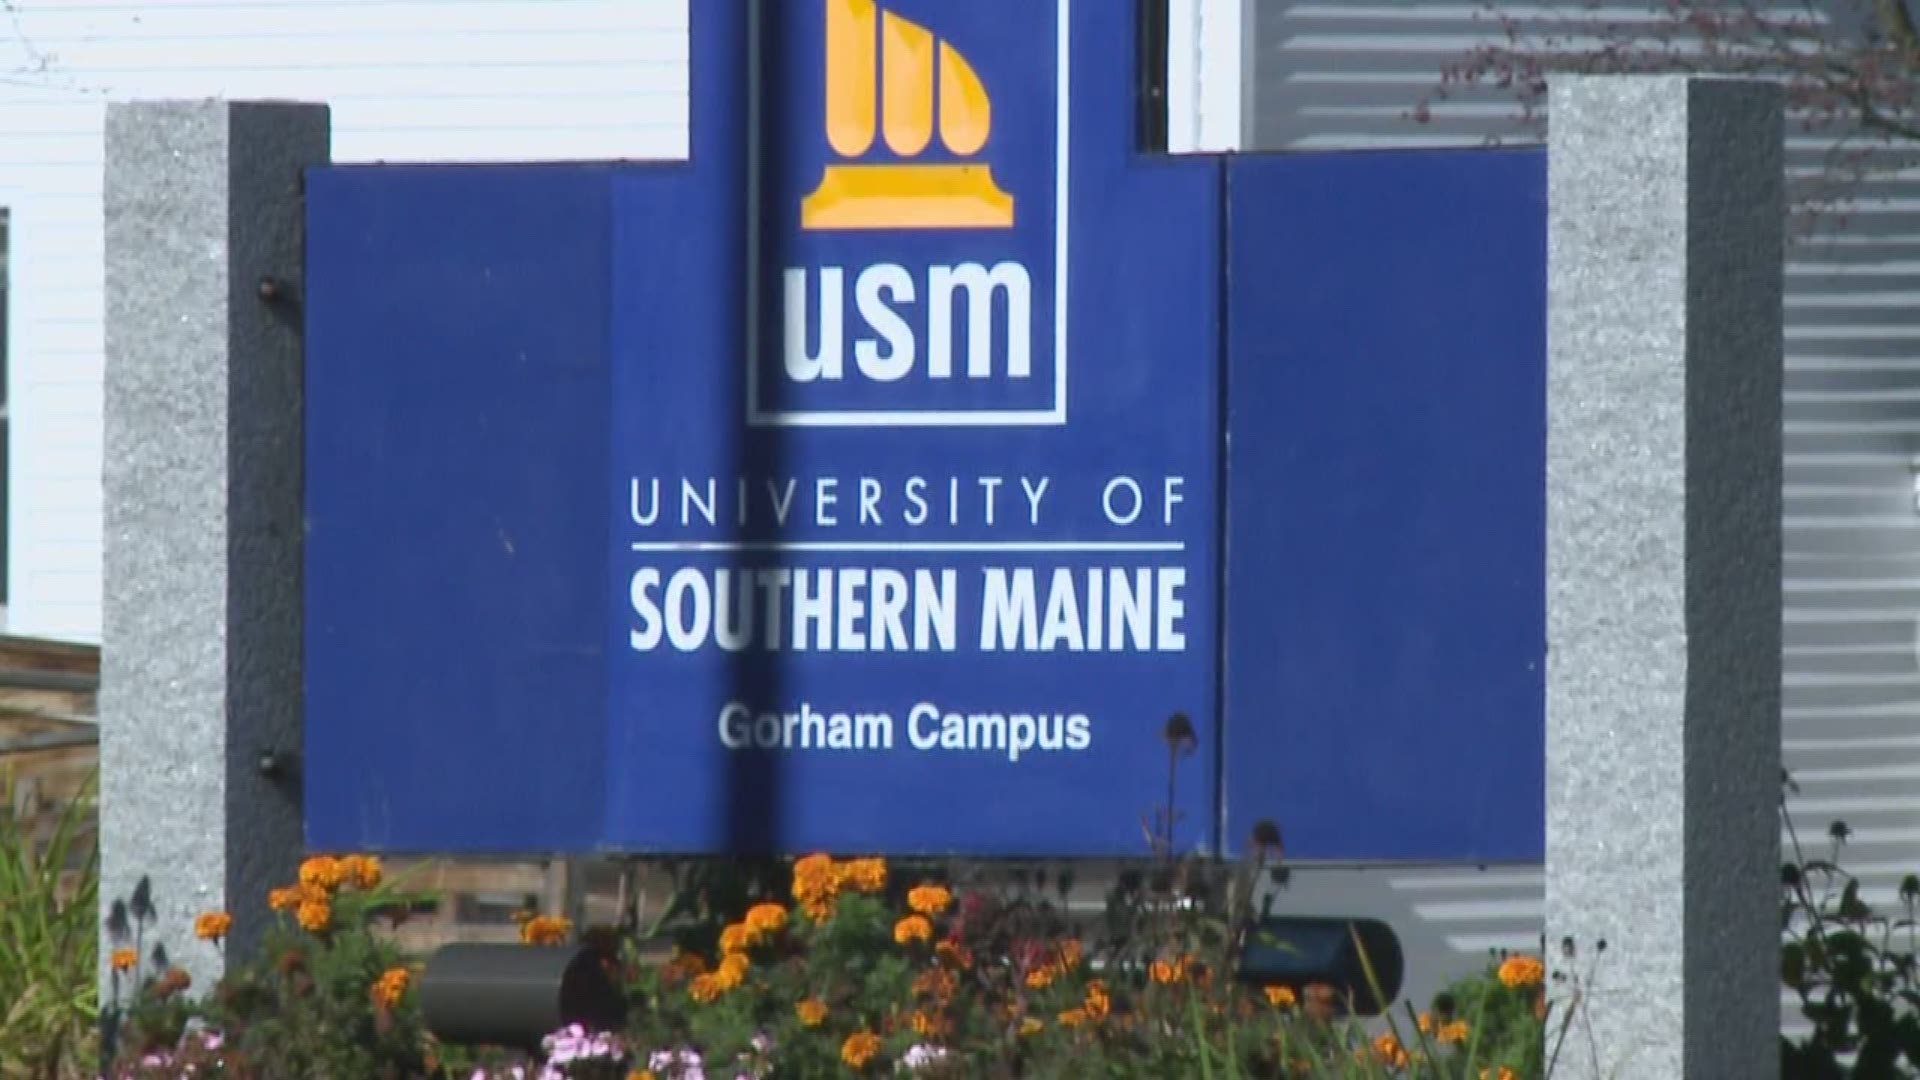 USM pulls credit offer for course involving travel to protest